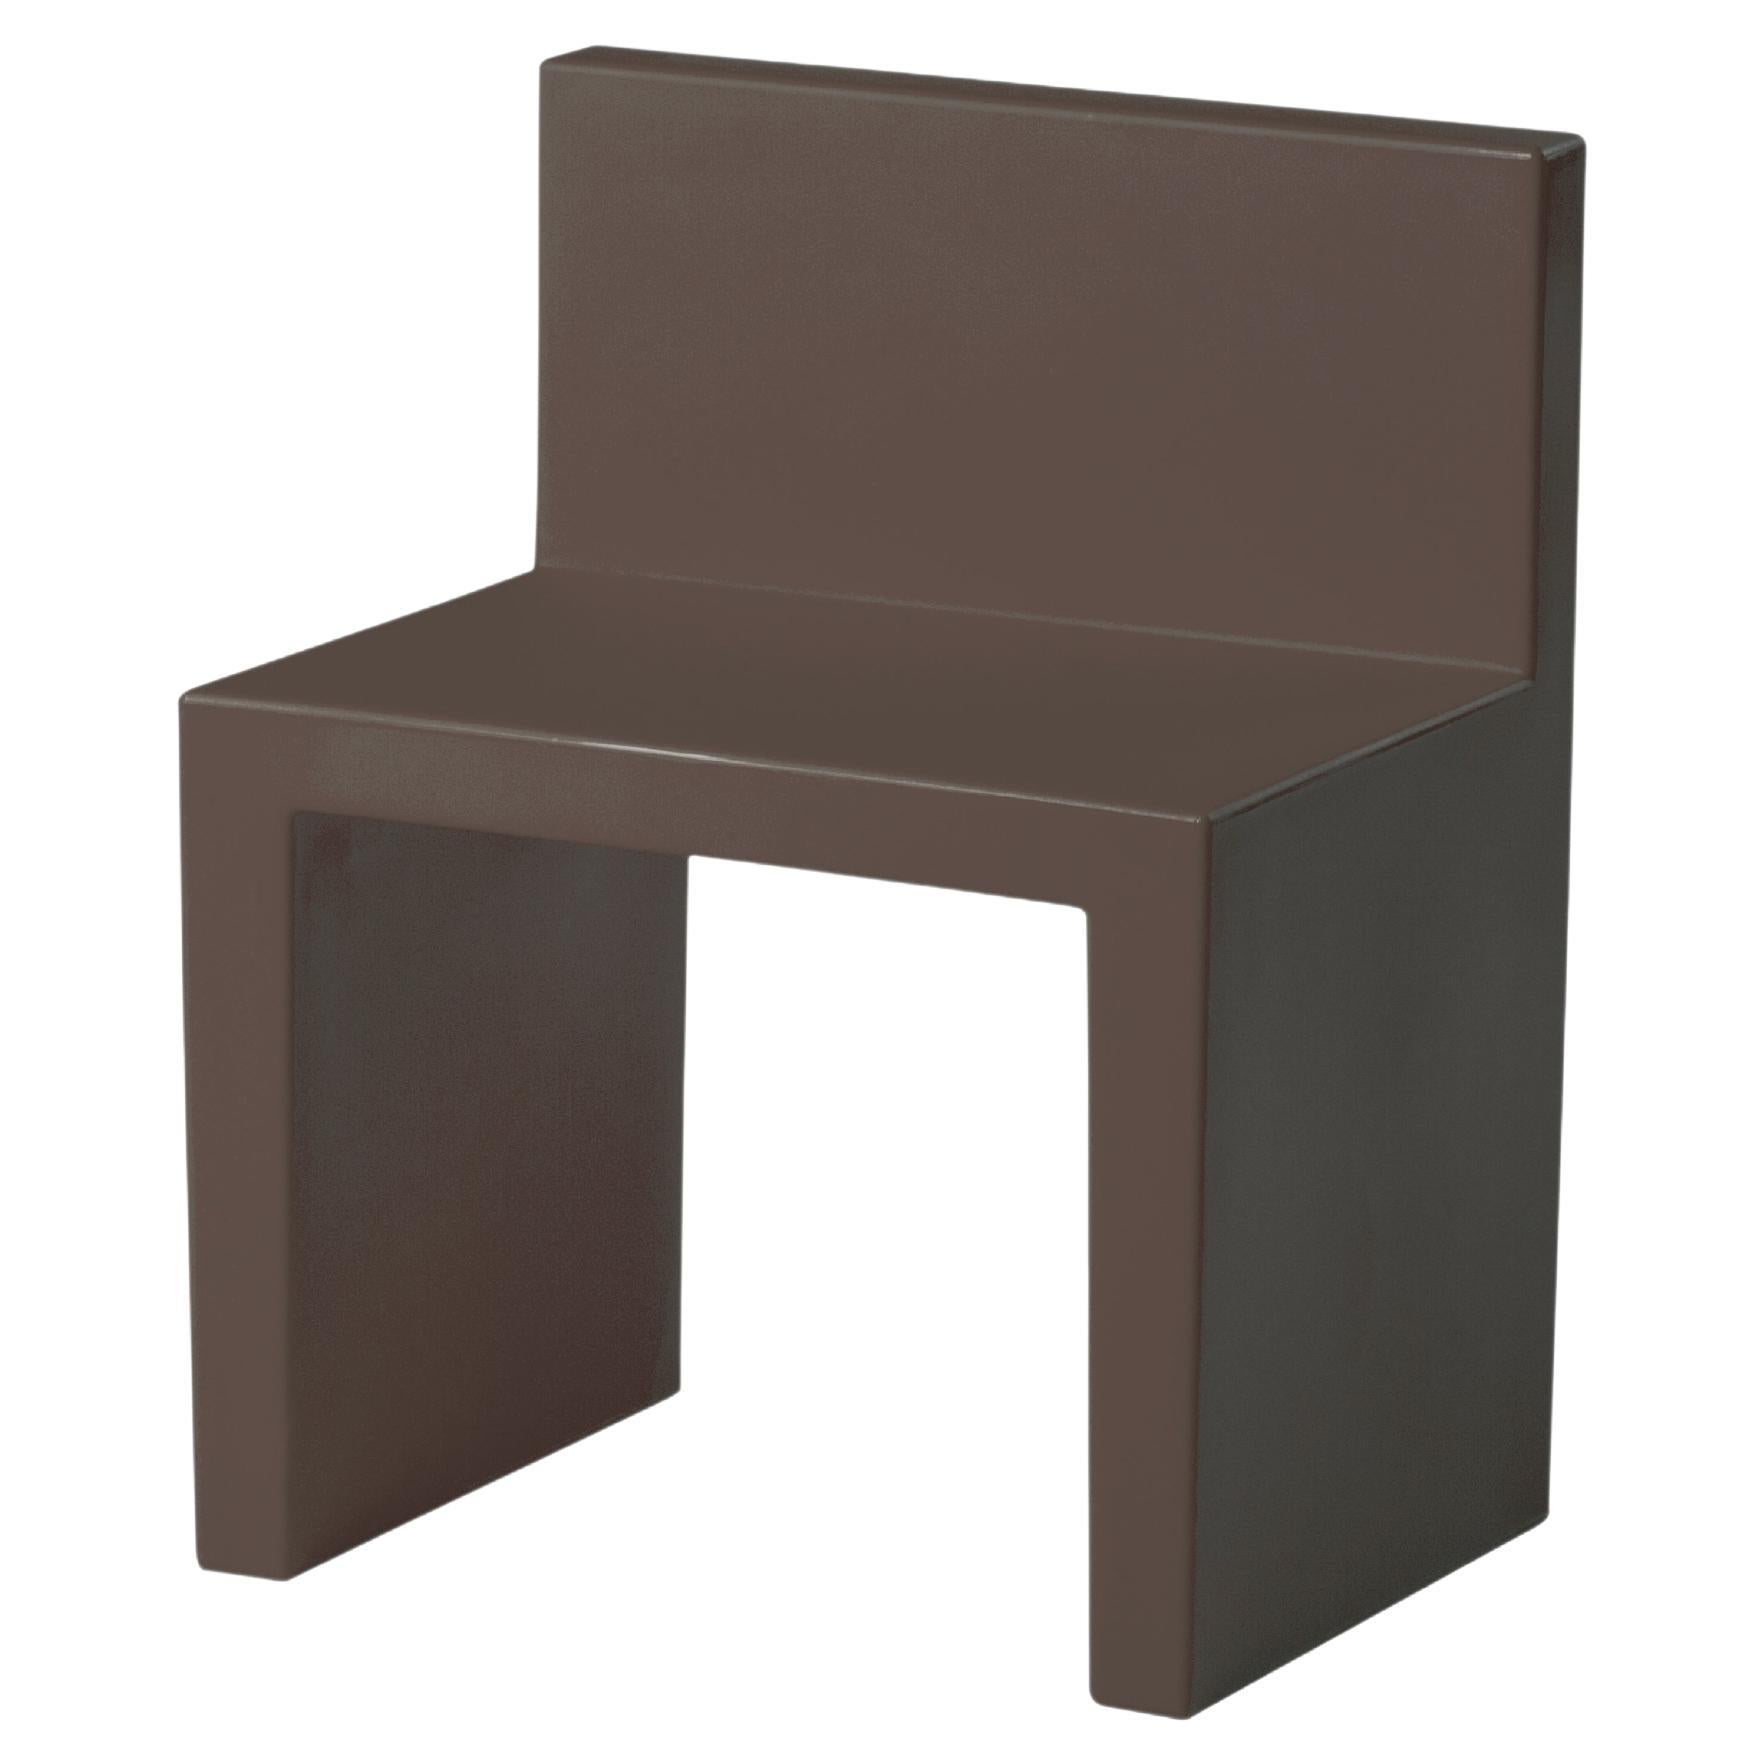 Slide Design Angolo Retto Kids Chair in Chocolate Brown by Slide Studio For Sale